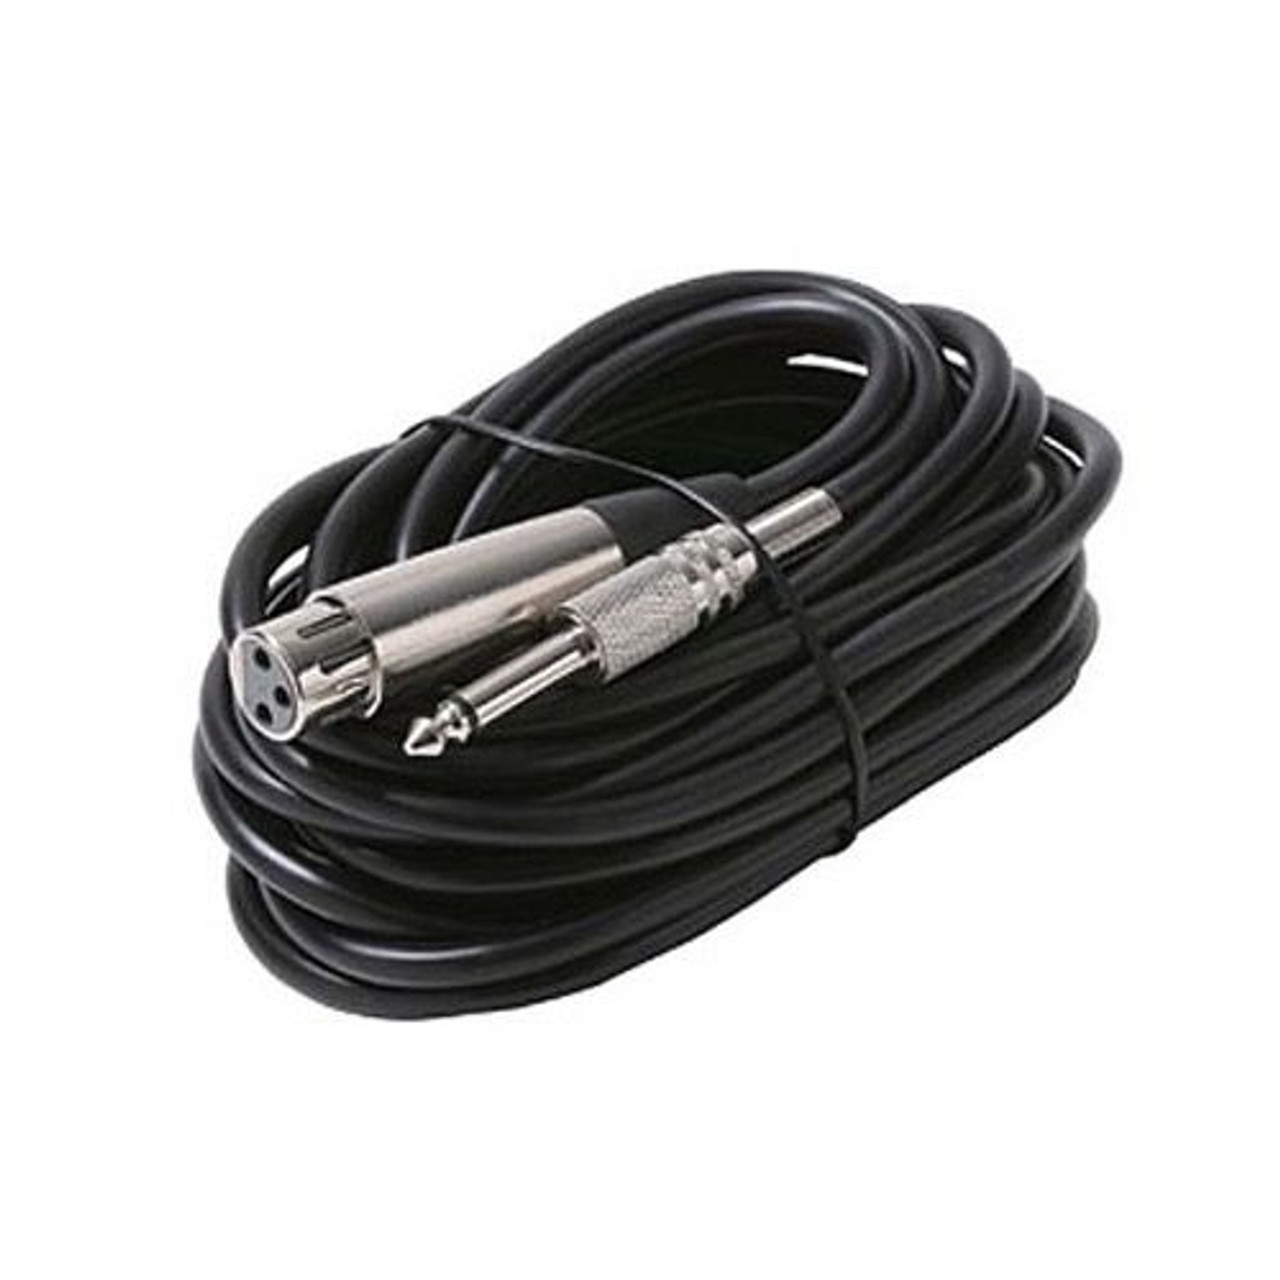 Steren 255-290 20' FT Microphone Cable 1/4" Jack to XLR with Chrome Shielded Connector 20' FT Micro-Phone Cable with 1/4" Audio Plug to 3-Pin XLR Jack, Part # 255290